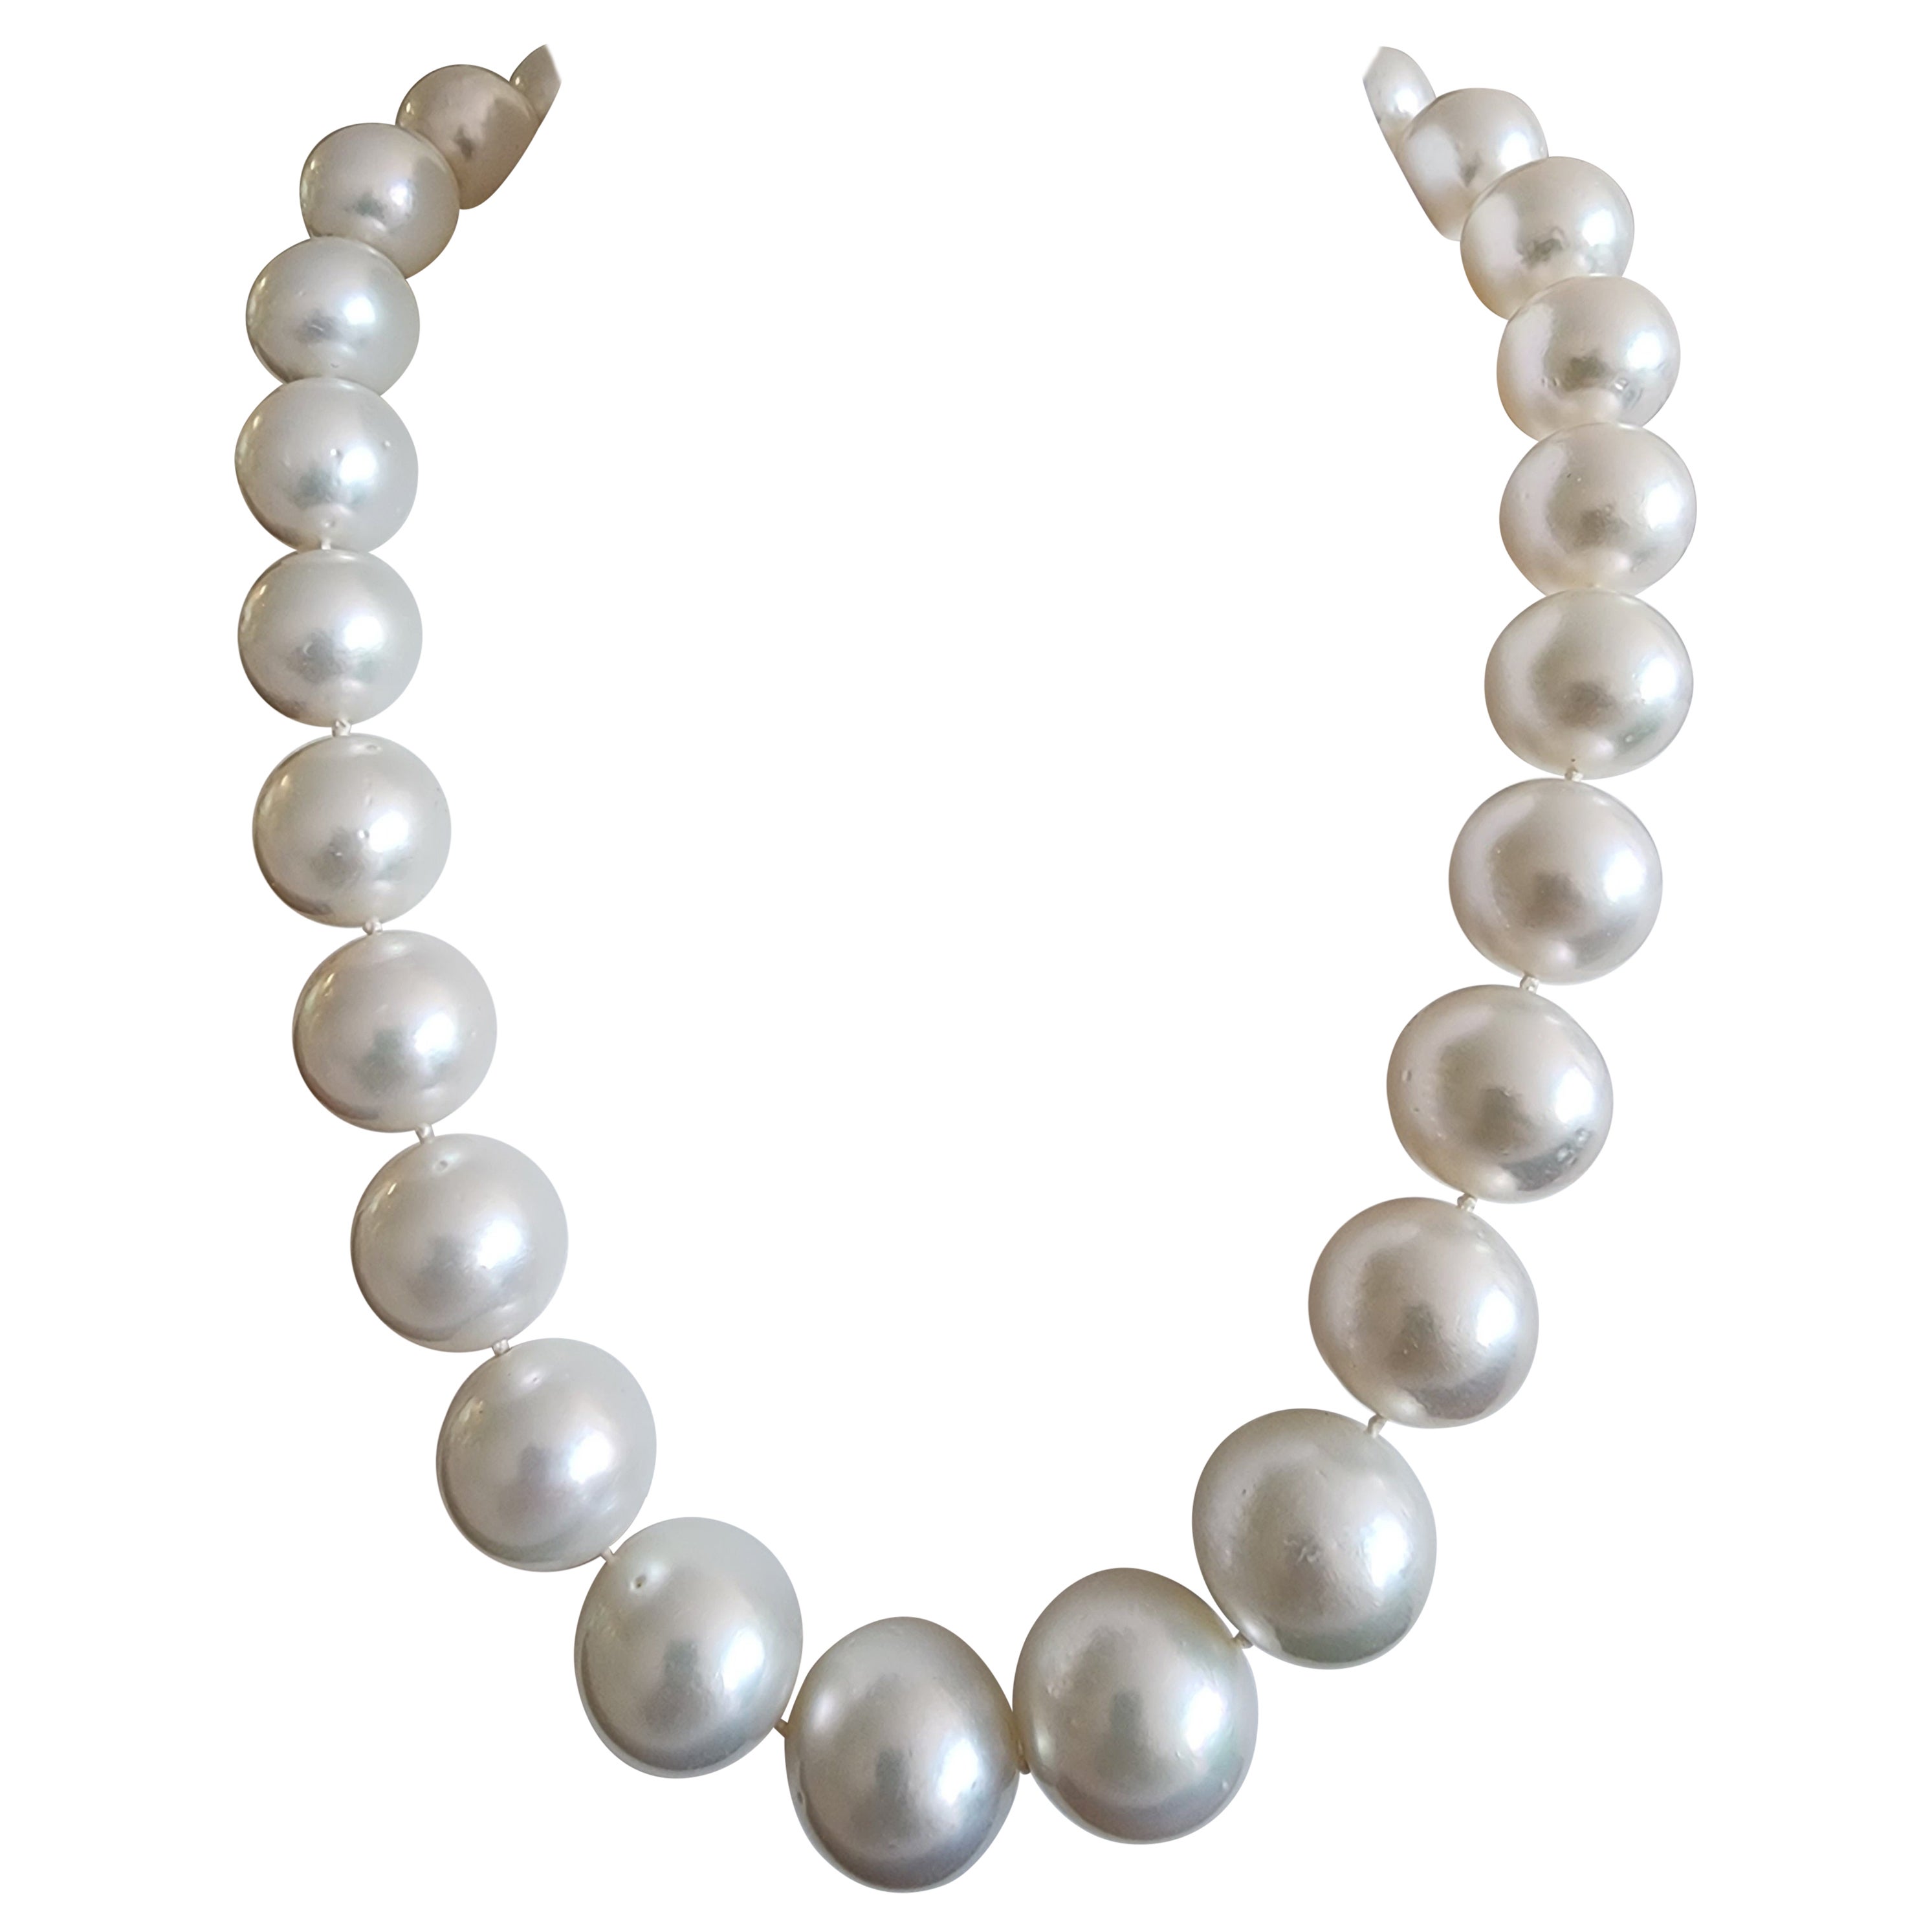 South Sea Pearl Choker Necklace